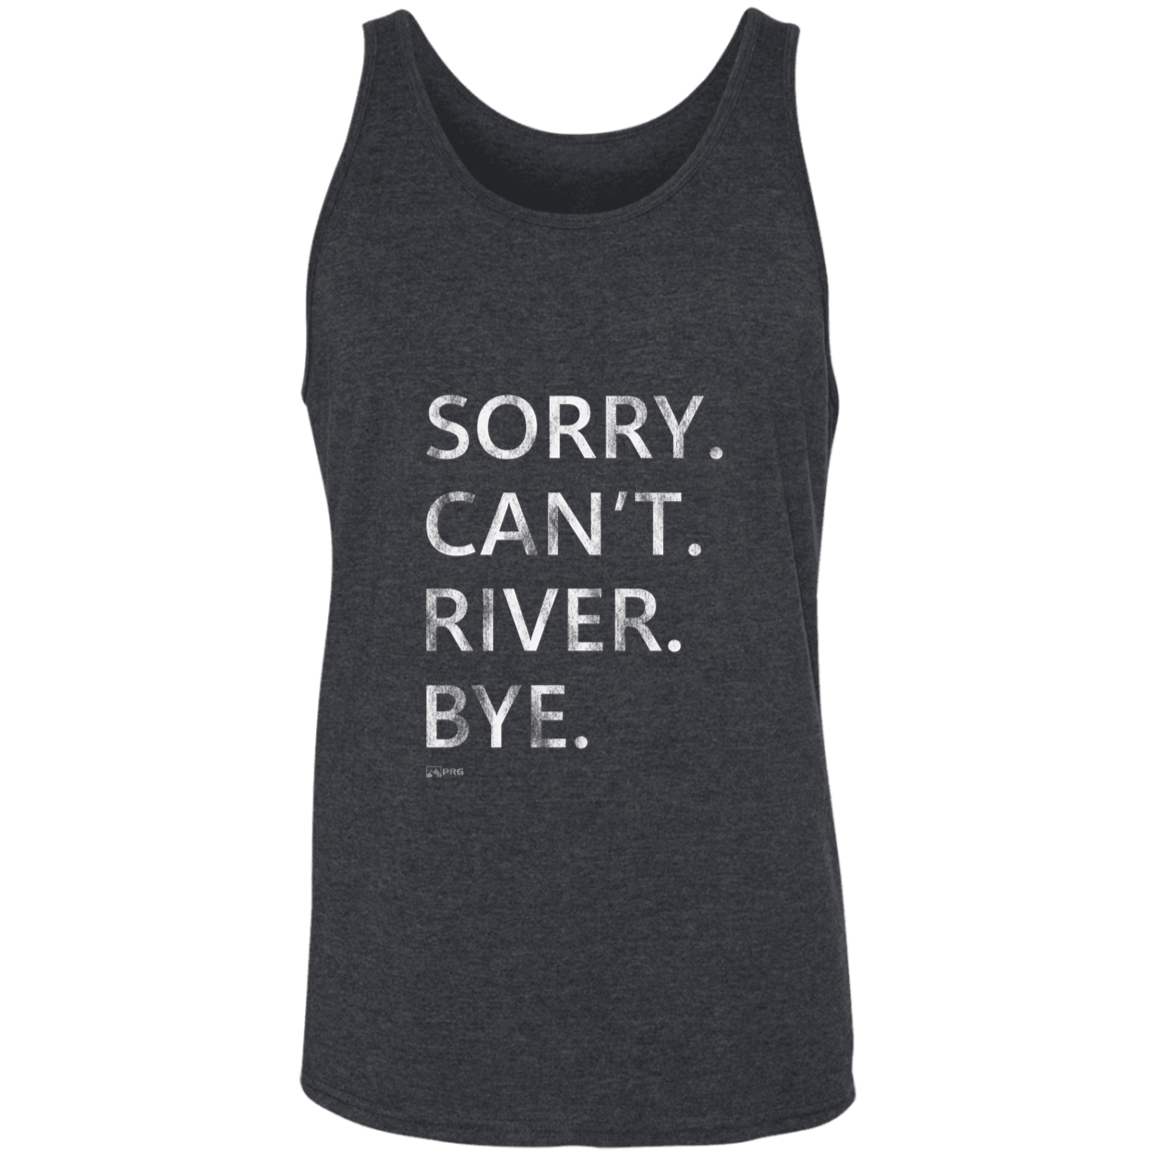 Sorry. Can't. River. Bye. - Tank